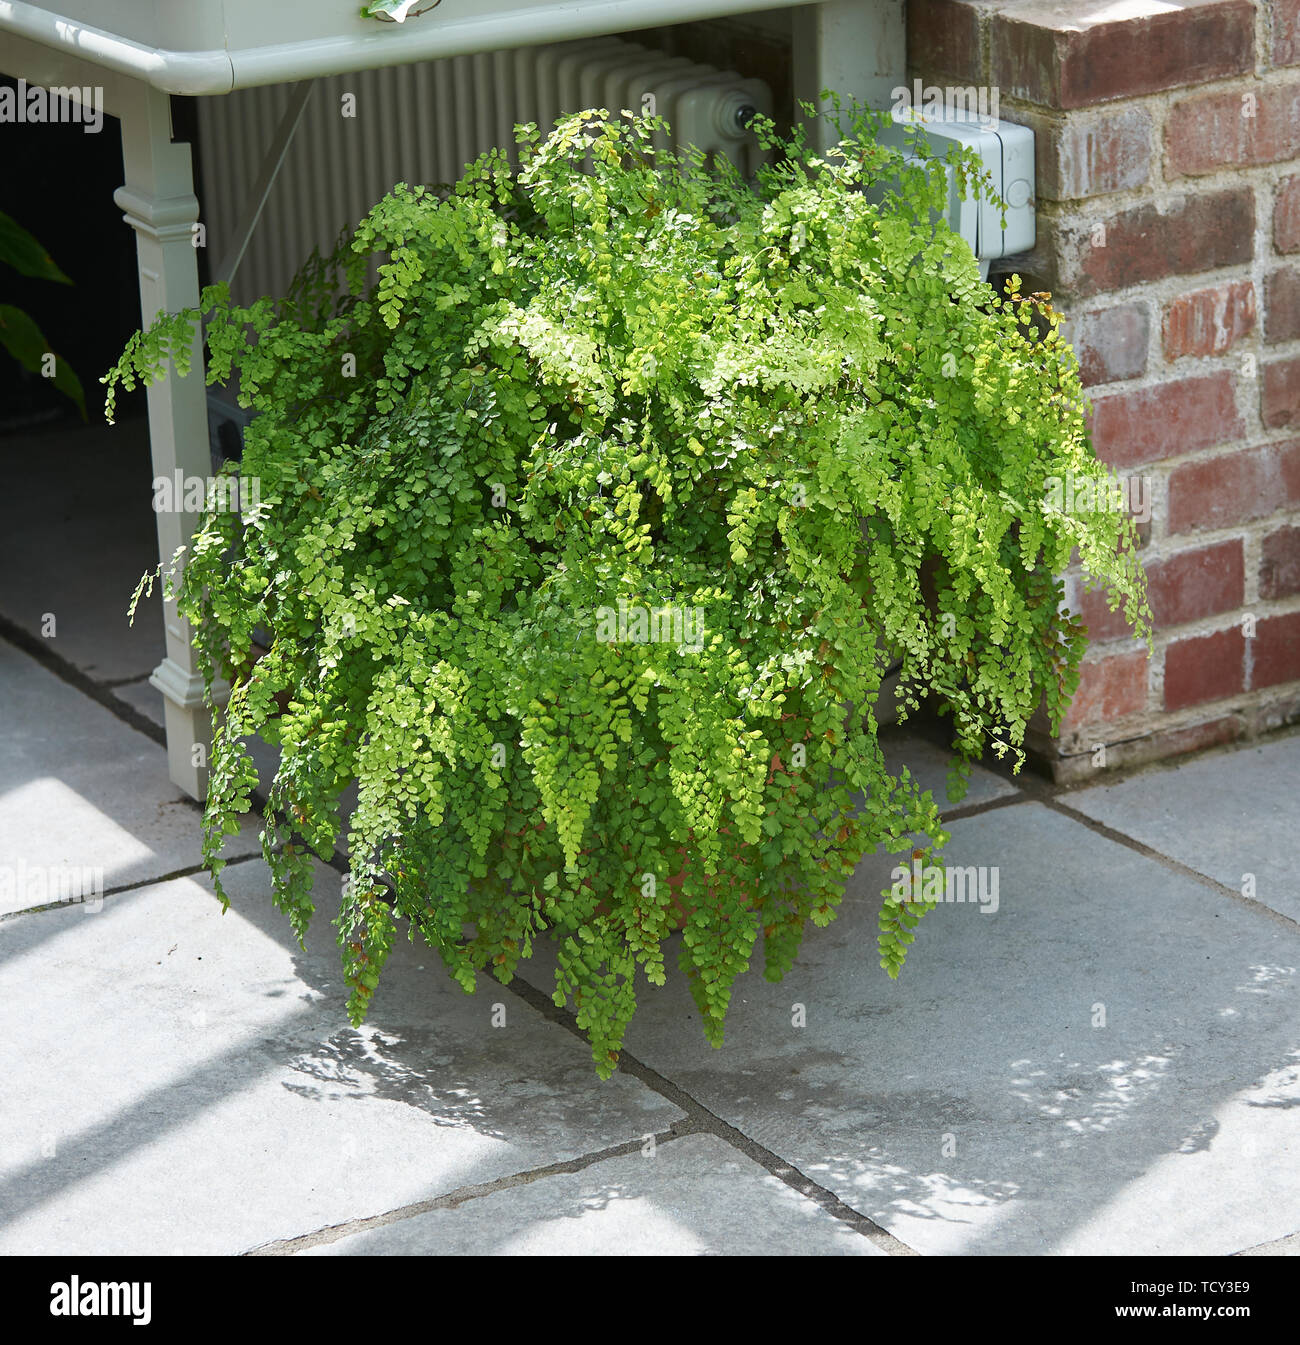 Maidenhair Fern Adiantum Capillus Veneris Growing In A Large Pot In A Shade Of A Greenhouse In The Summer Stock Photo Alamy